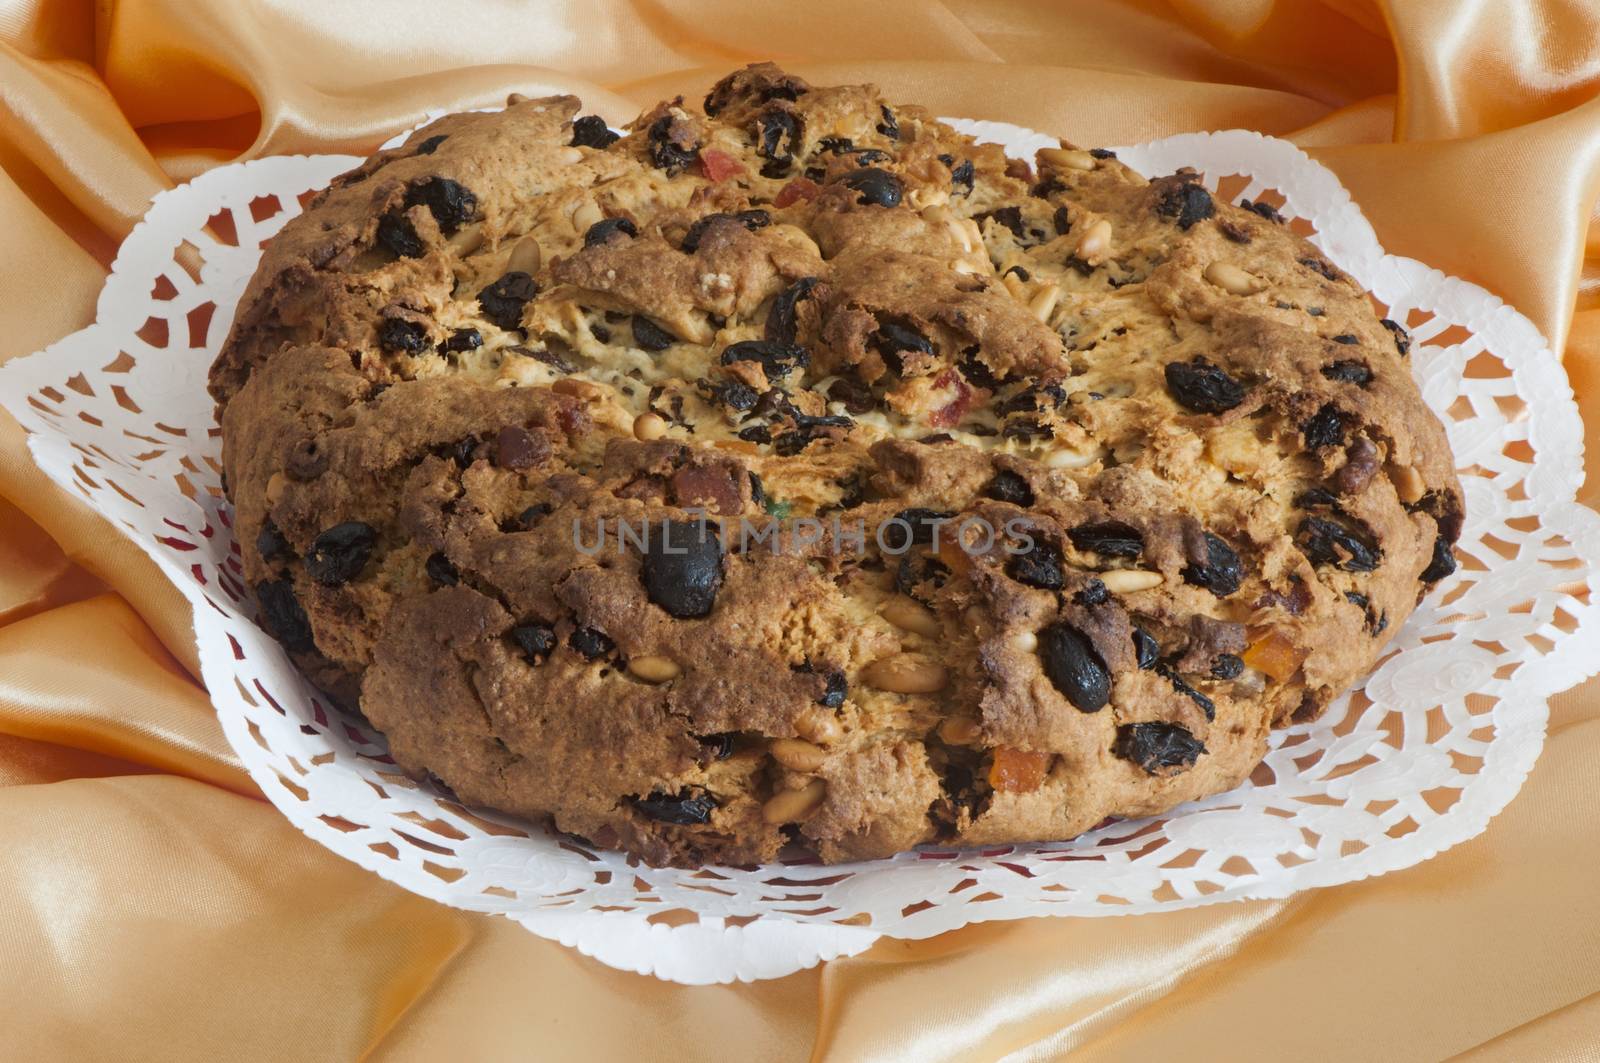  Italian home made panettone on fabric background